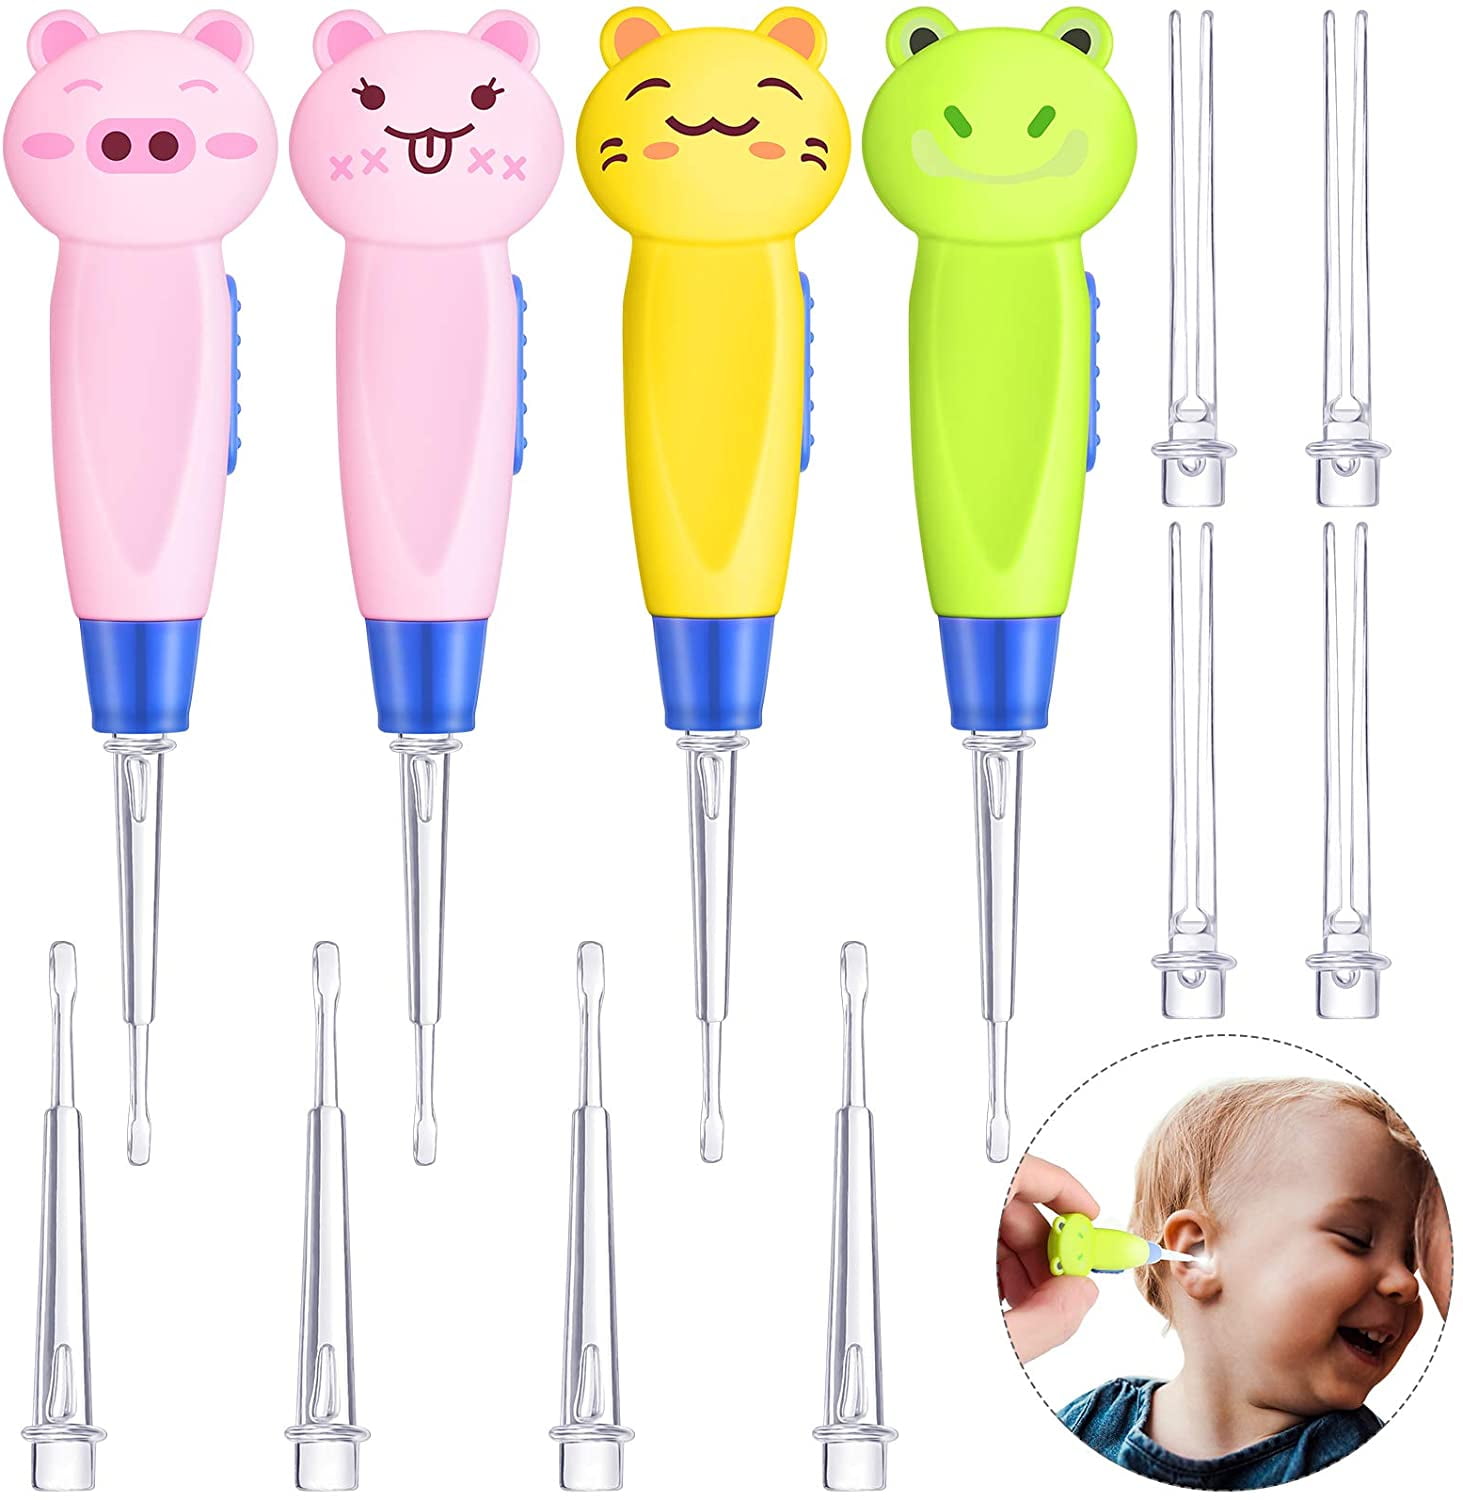 Visland Kids Ear Wax Removal LED Light Children Earwax Remover Tool LED  Illuminated Ear Pick Ear Wax Remover Clip Tweezers Ear Spoon Cleaner with  LED Light for Kids 